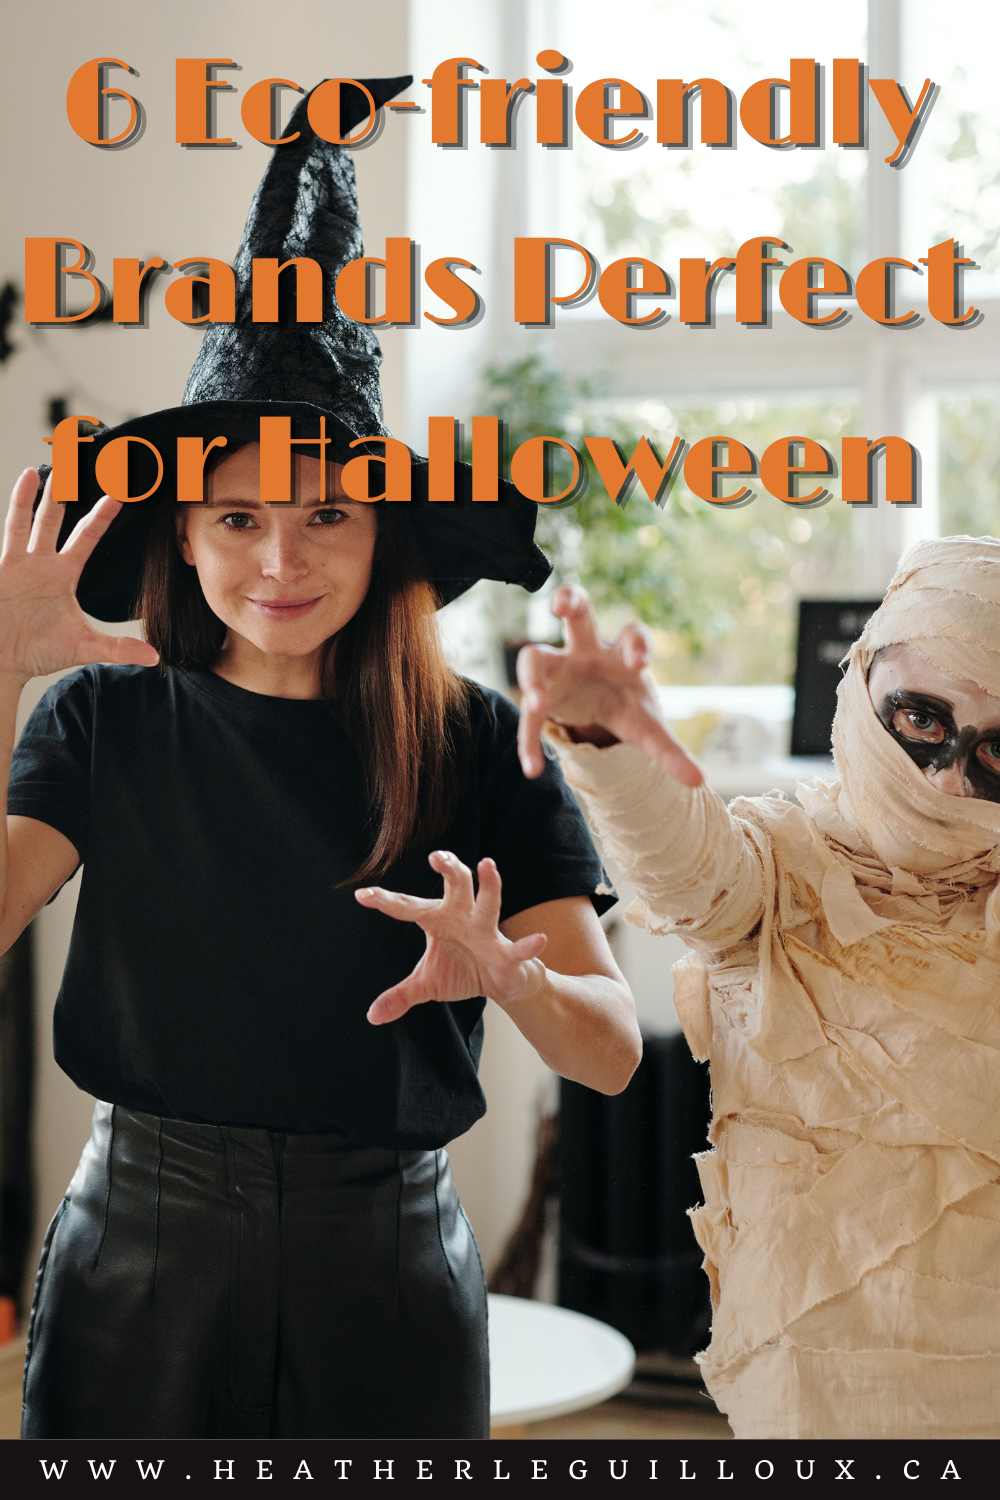 Halloween is a fun holiday for both adults and children alike. And as the countdown to Halloween approaches, companies are getting into the spooky festivities with all sorts of products to satisfy any scare-lover or casual costume wearer. Thankfully, there are a bunch of eco-friendly brands that do Halloween in a sustainable way. Find out more about the six eco-friendly brands that will make your Halloween spooktacular. #Halloween #ecofriendly #treats #decor #costume